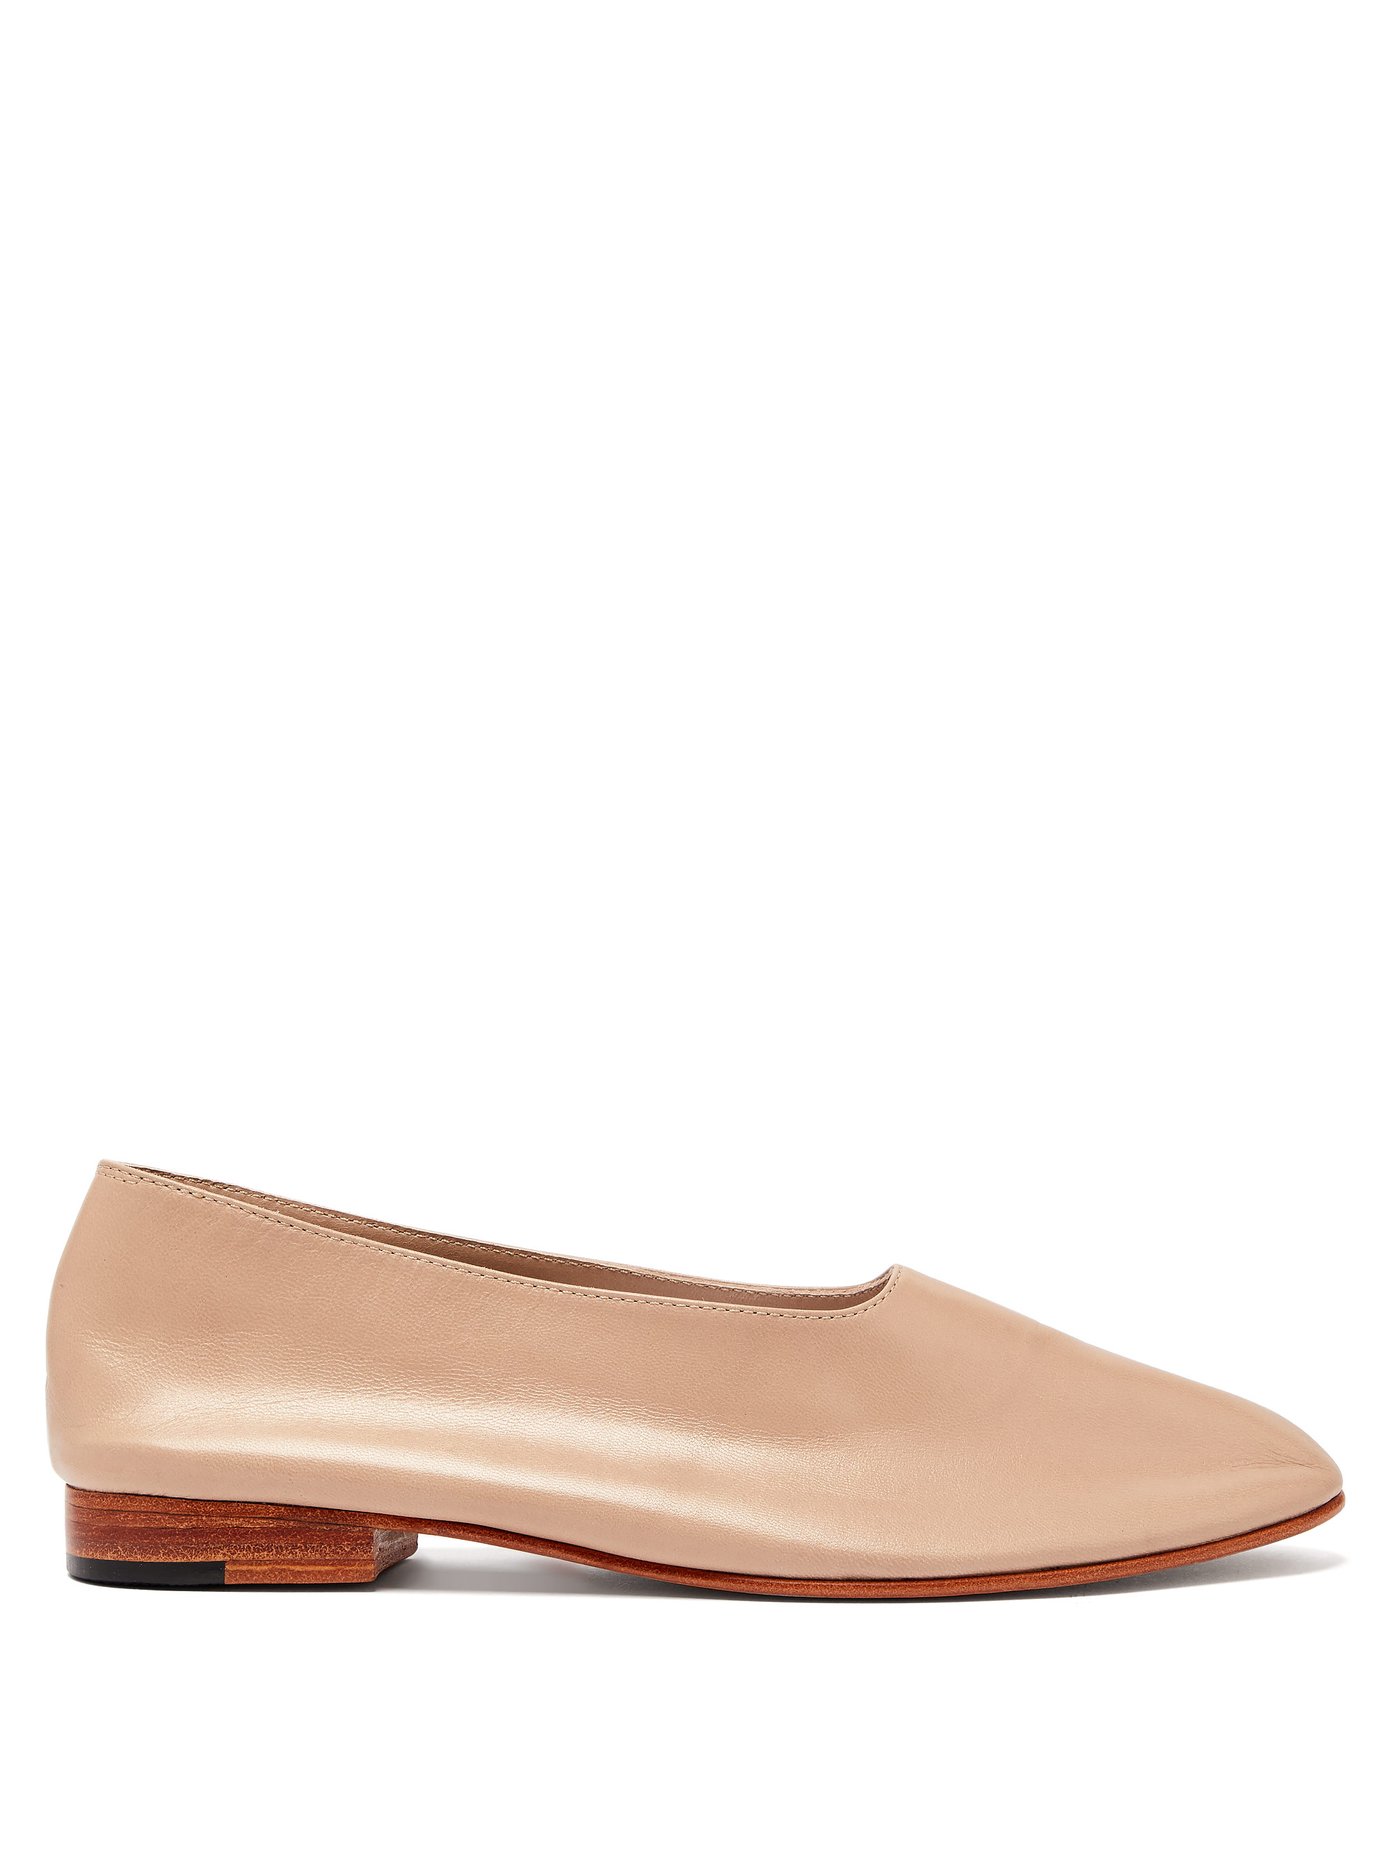 Glove leather ballet flats | Martiniano 